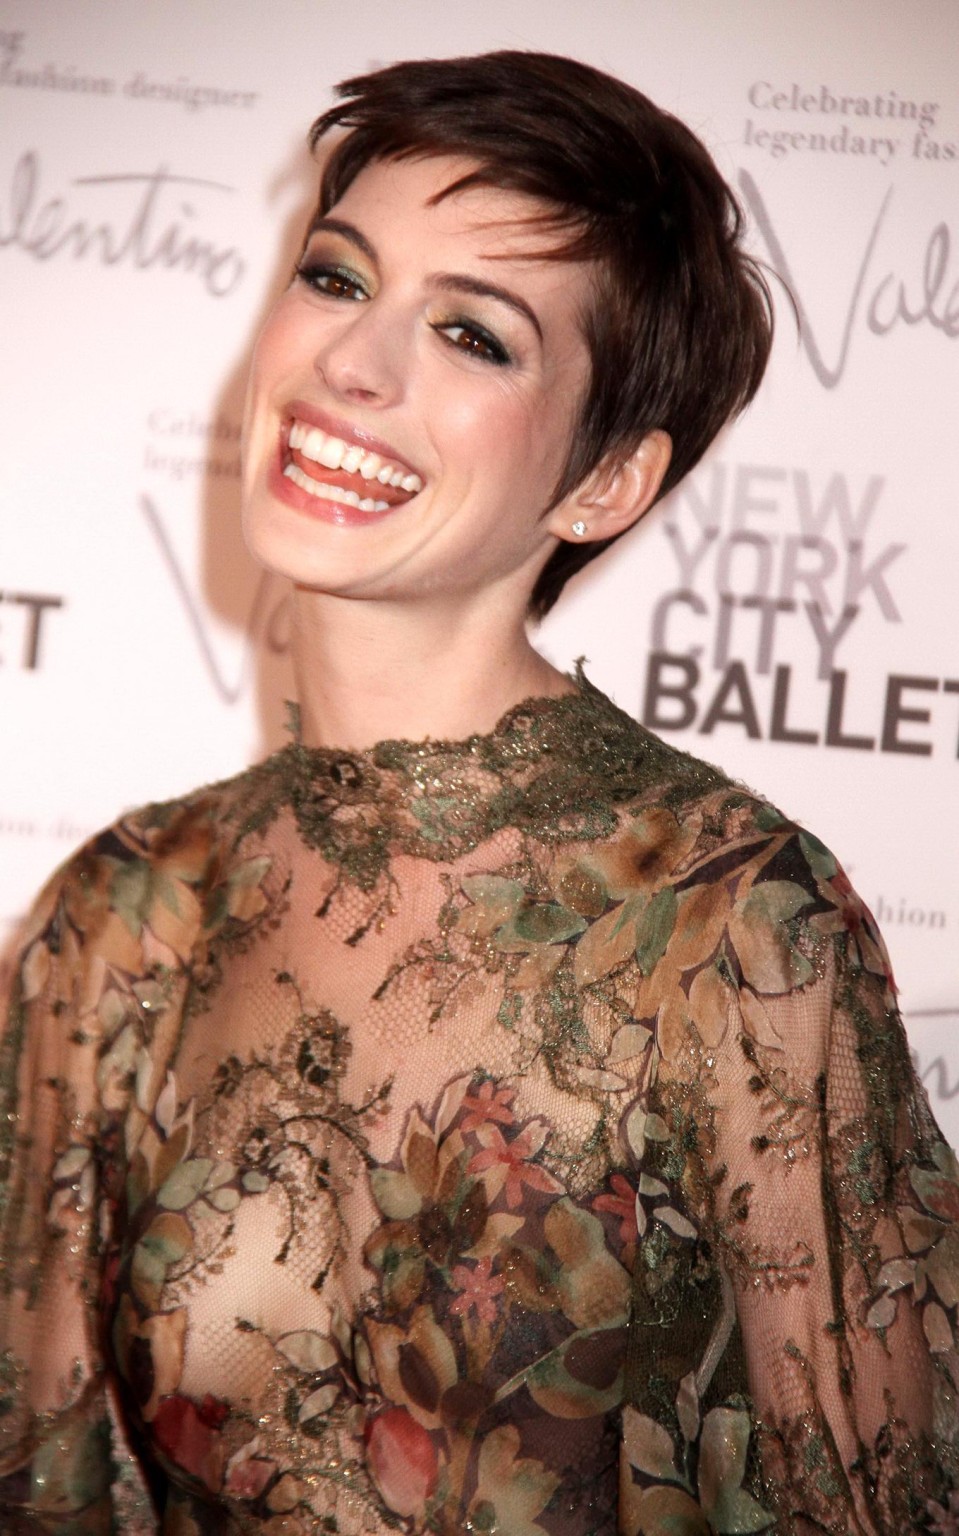 Anne Hathaway braless wearing a partially see through dress at New York Balet Fa #75252259